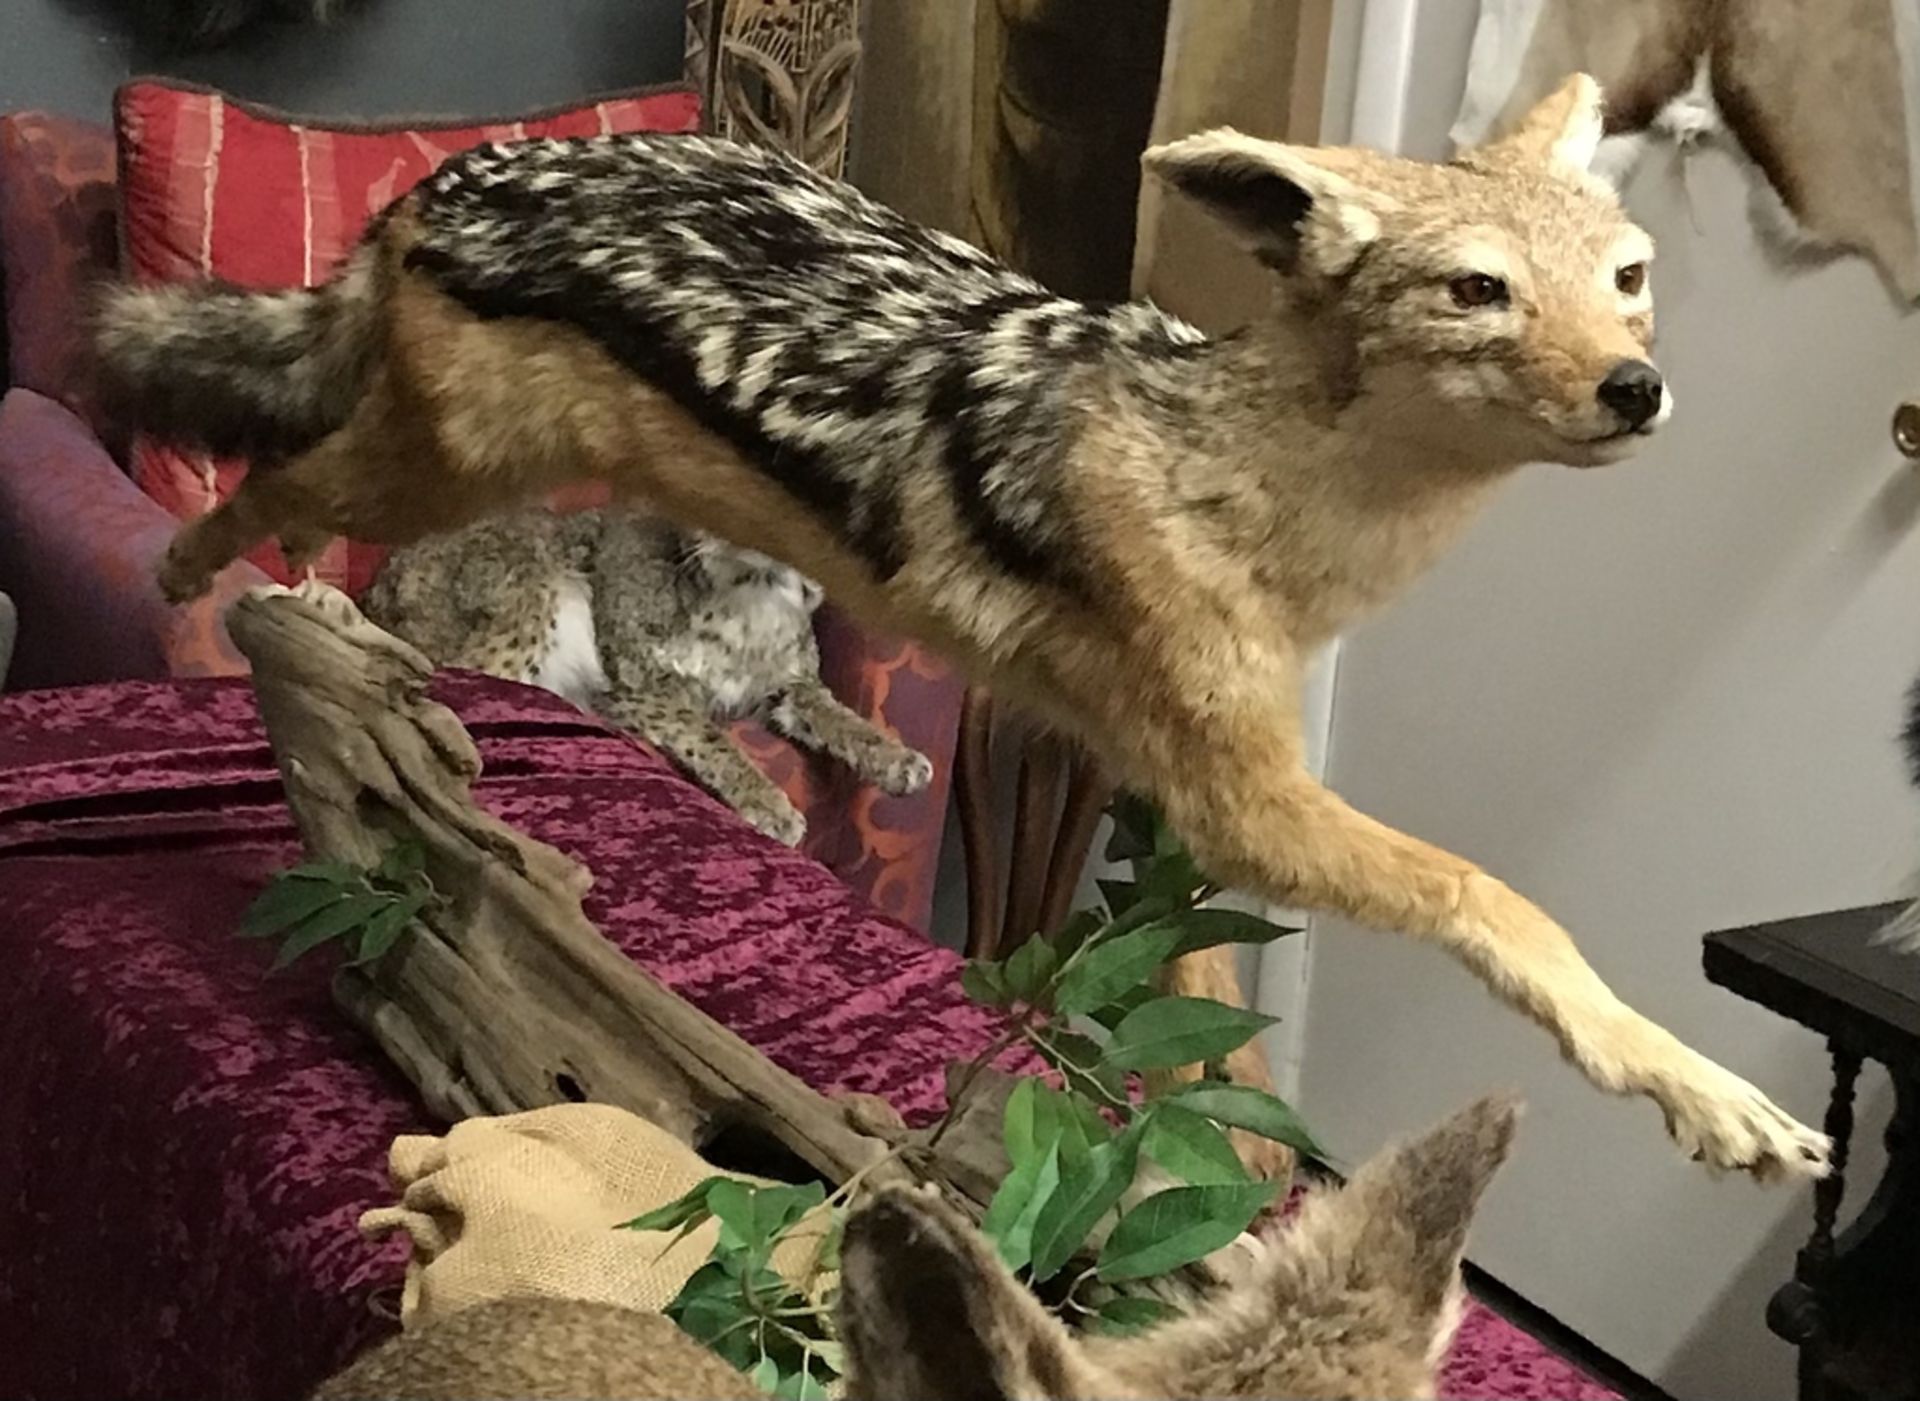 BLACK BACKED JACKEL LEAPING Taxidermy - Image 3 of 3